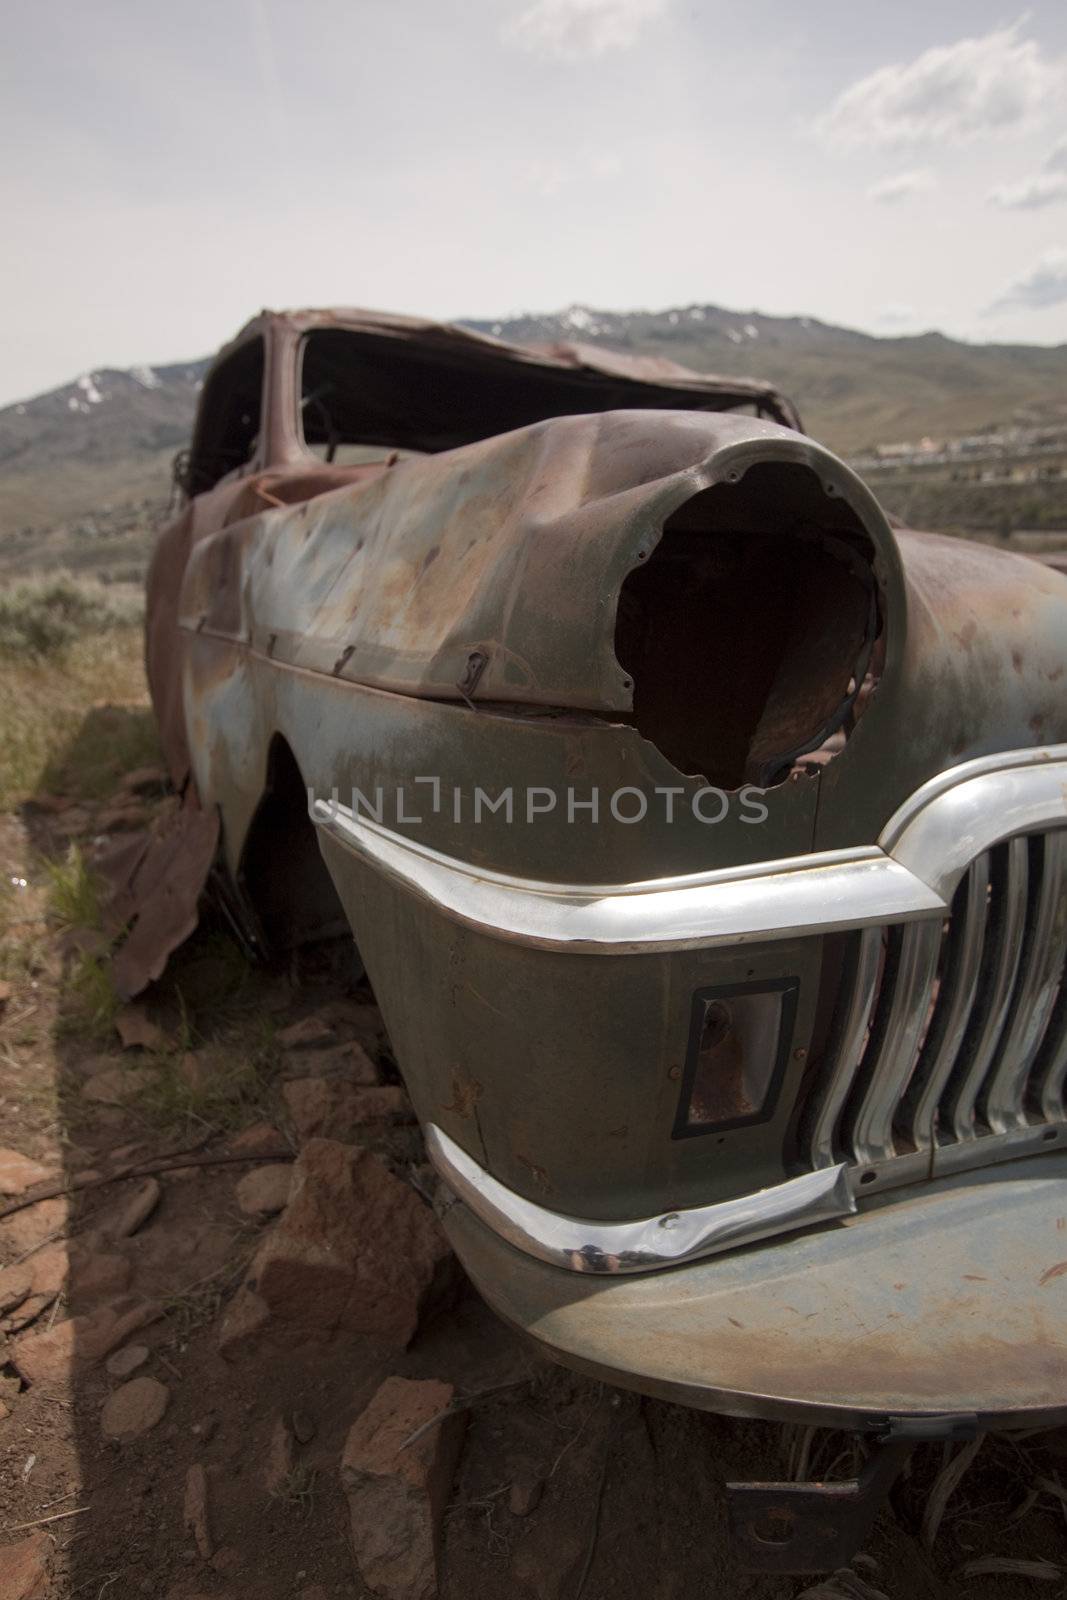 Old abandoned car with bullet holes. Reno Nevada high desert